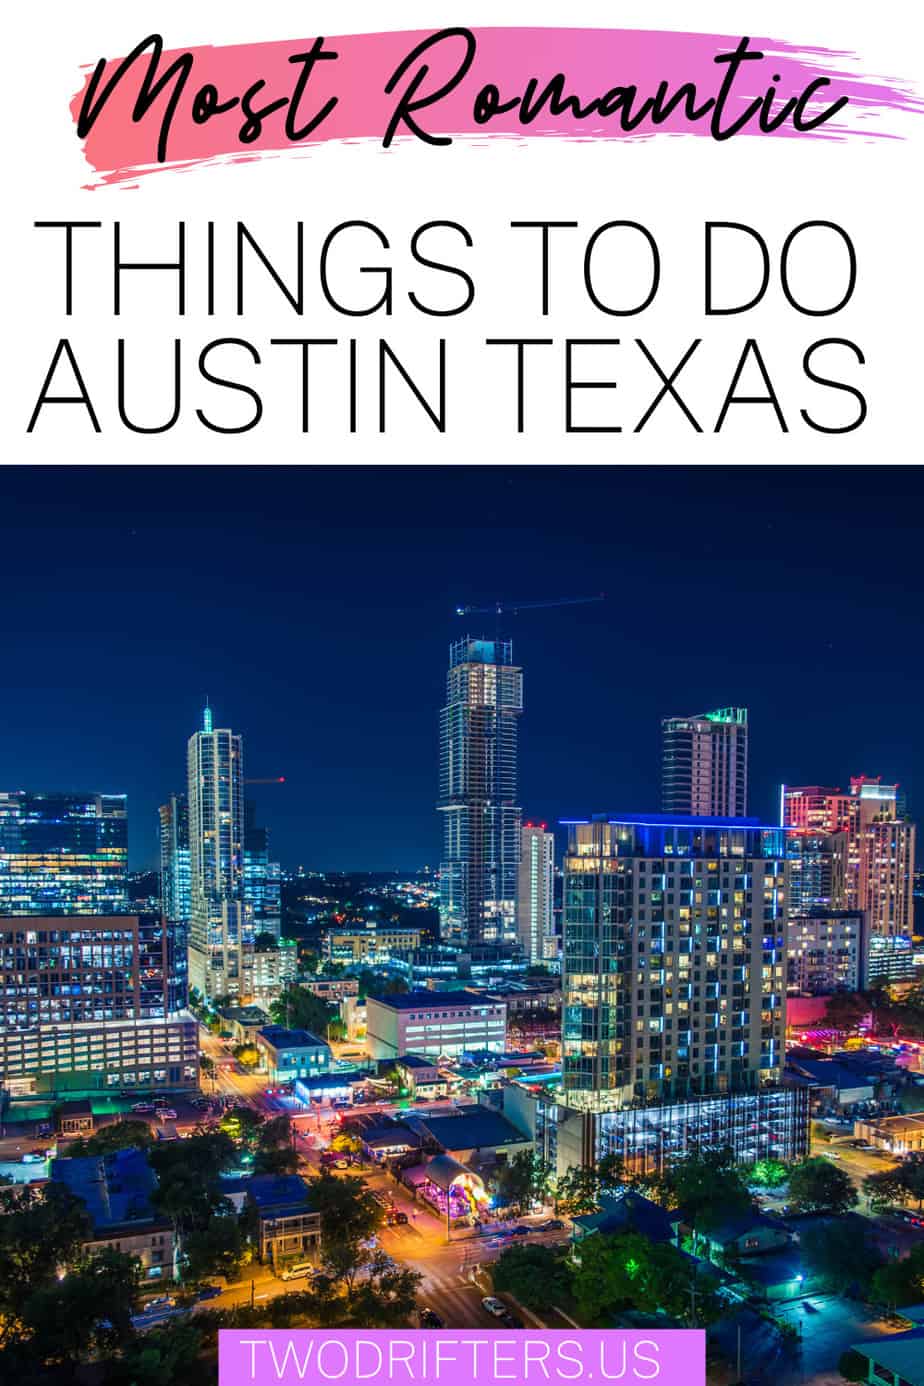 Pinterest social image that says “Most romantic things to do in Austin Texas.”